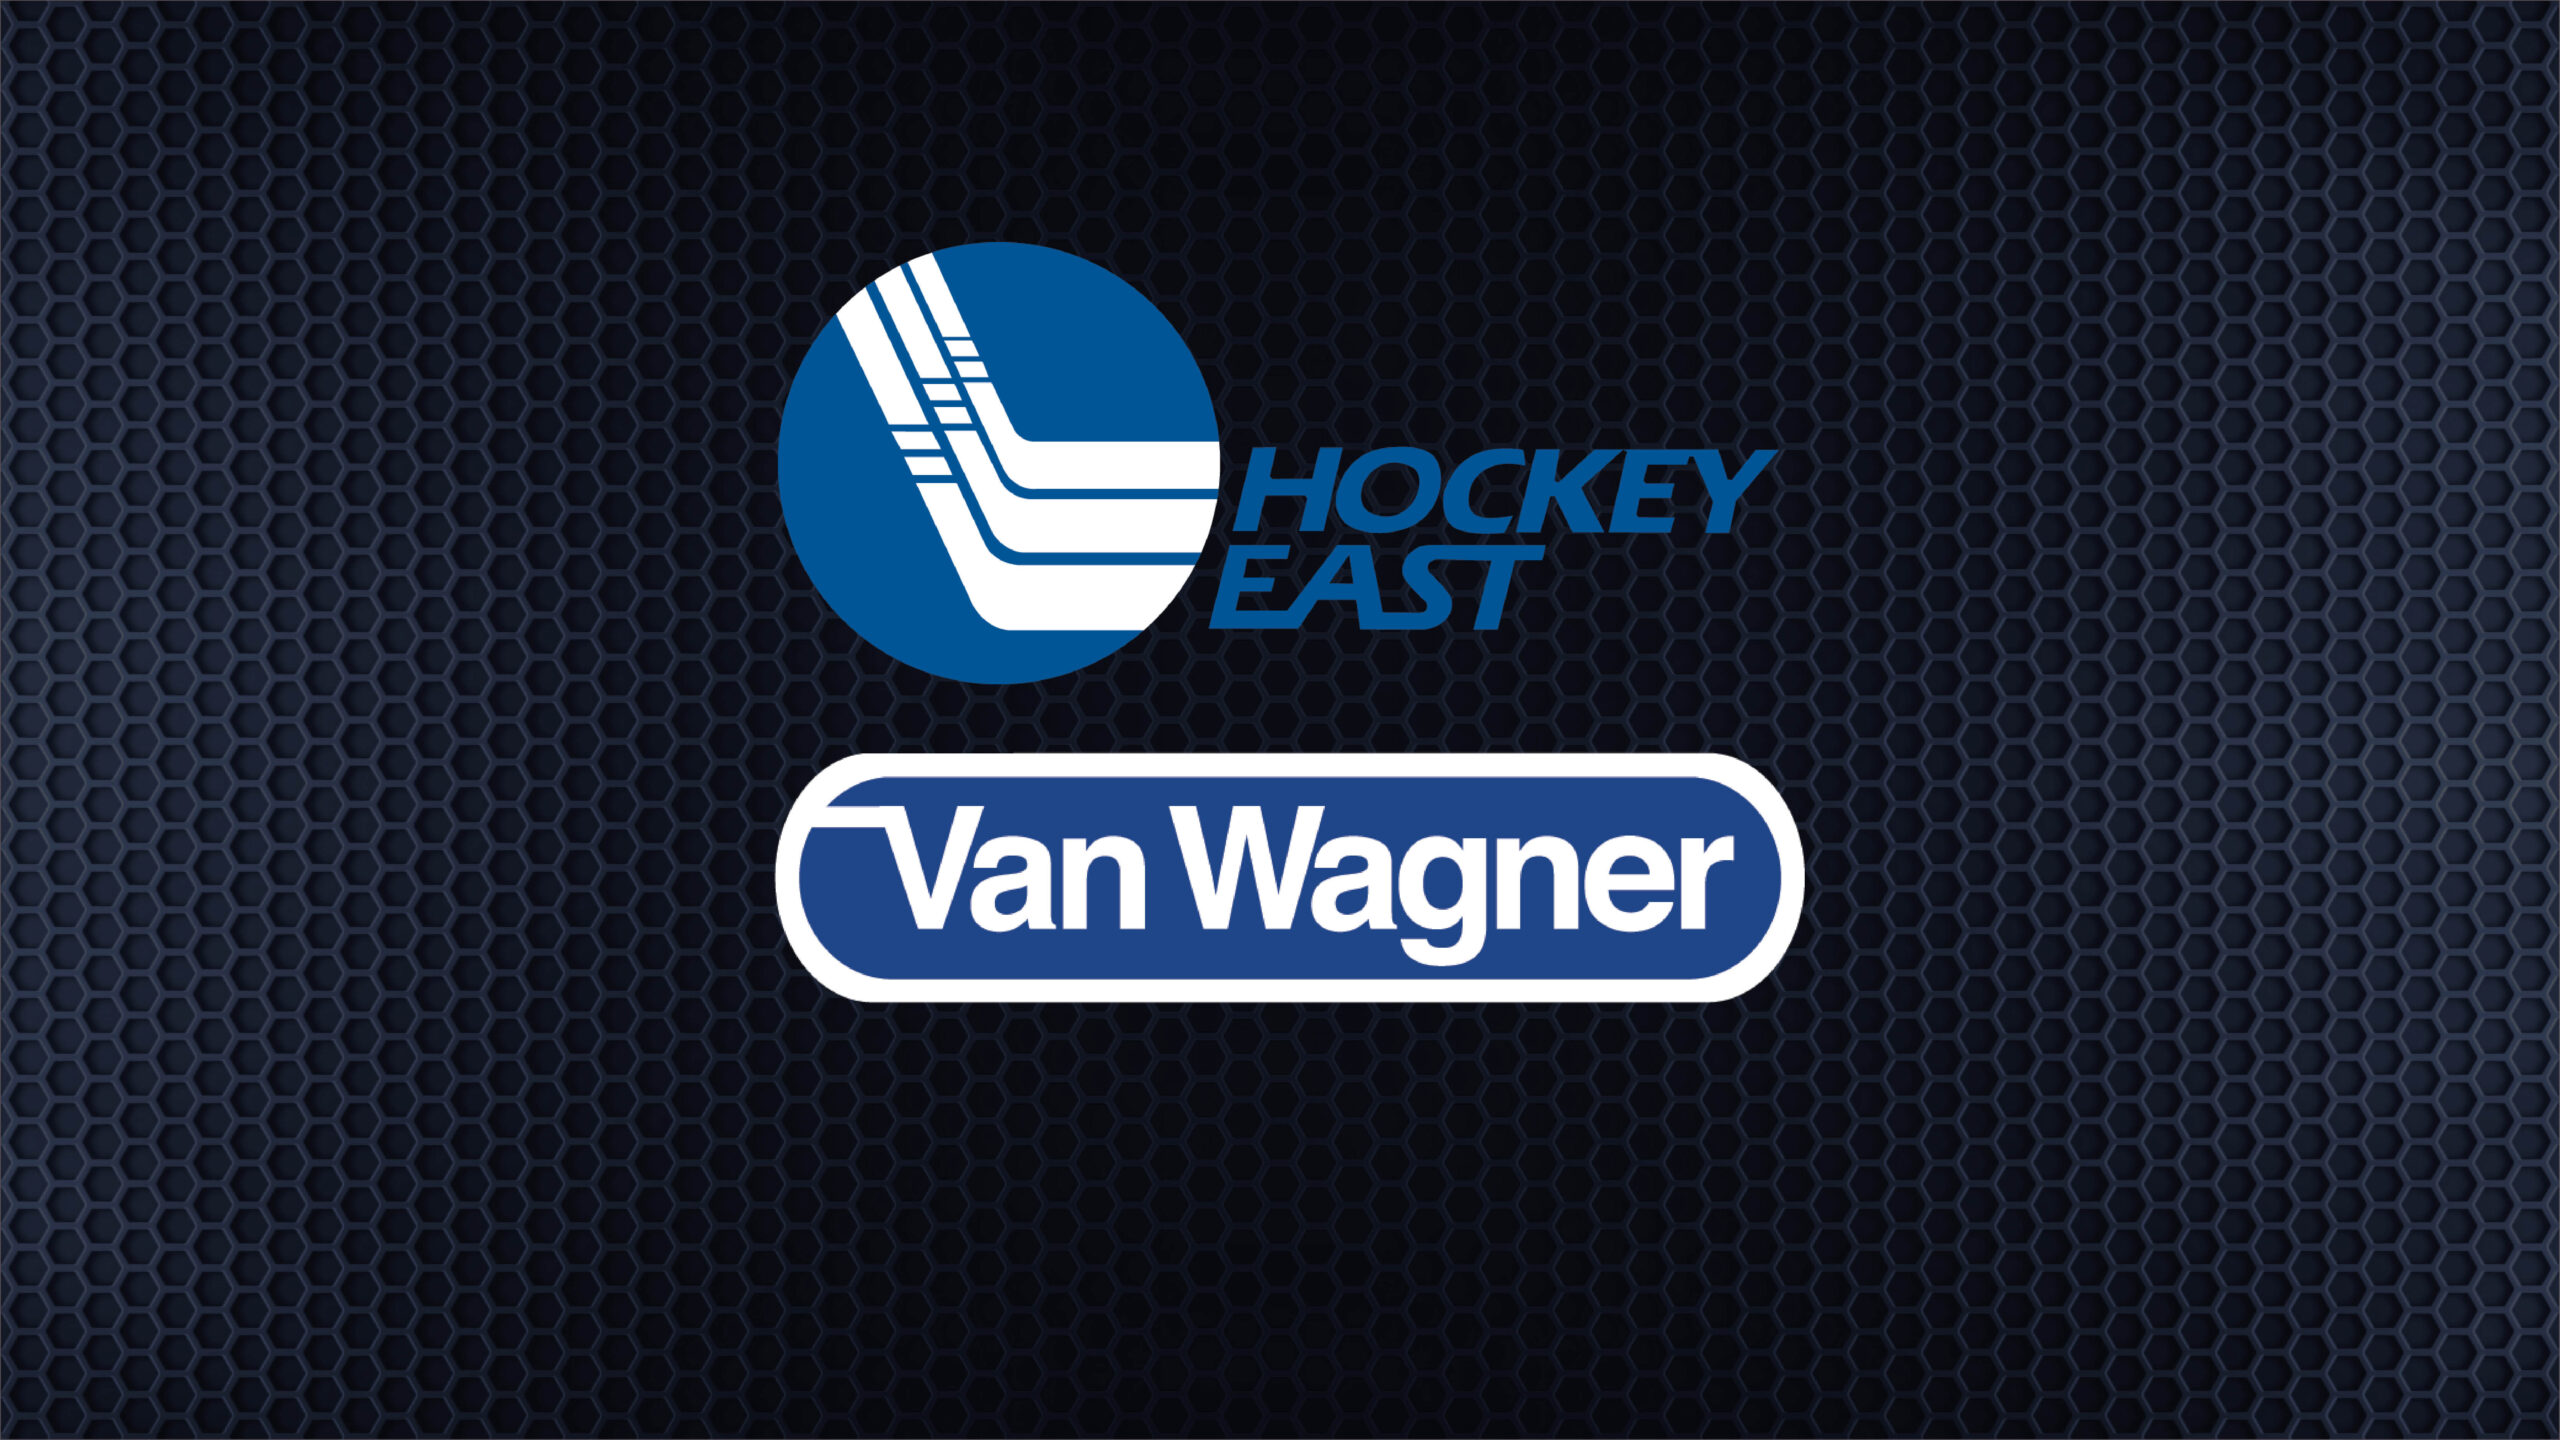 Hockey East Association and Van Wagner Announce Multi-Year MMR Partnership featured image